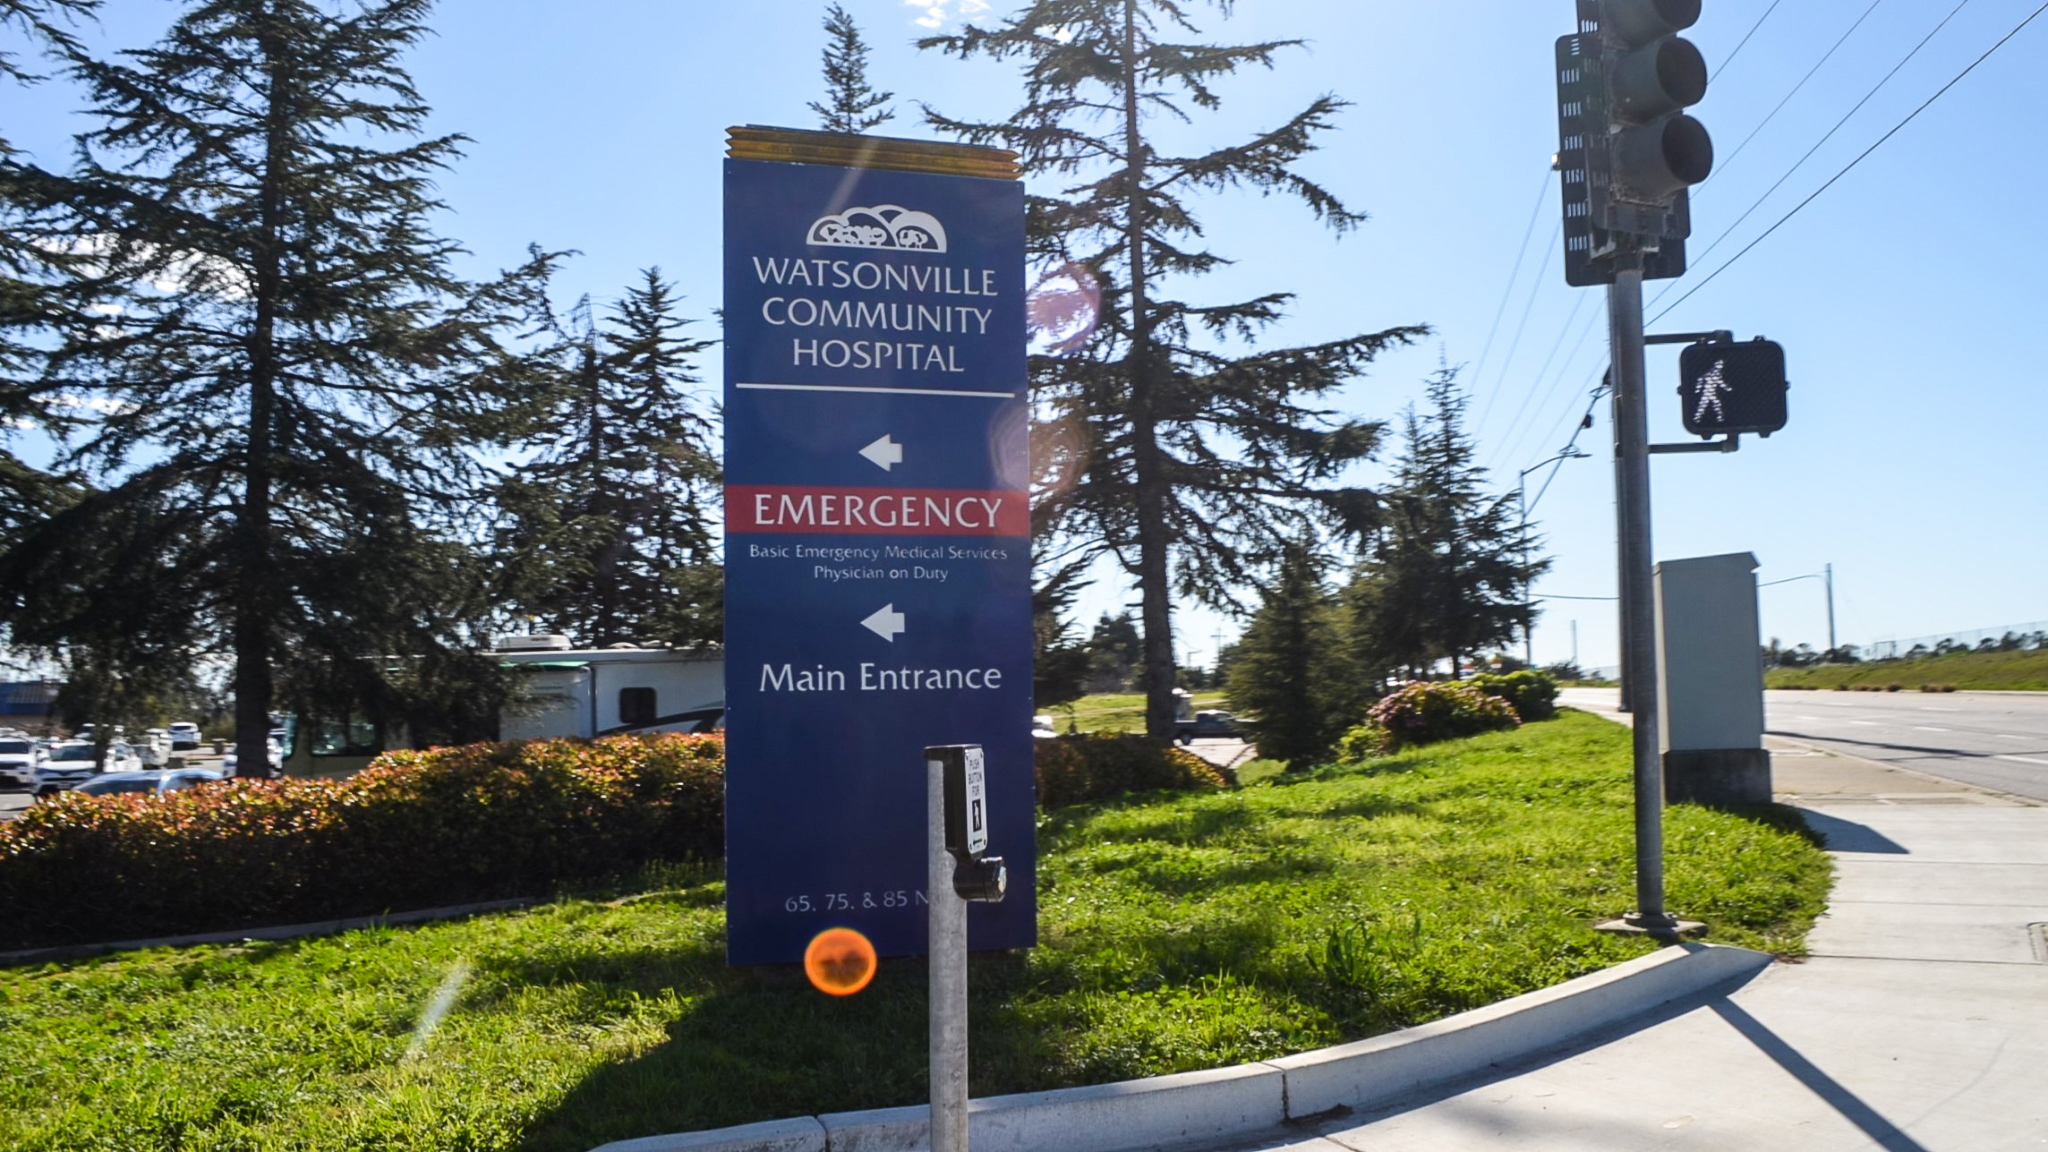 The sign at the entrance to Watsonville Community Hospital.